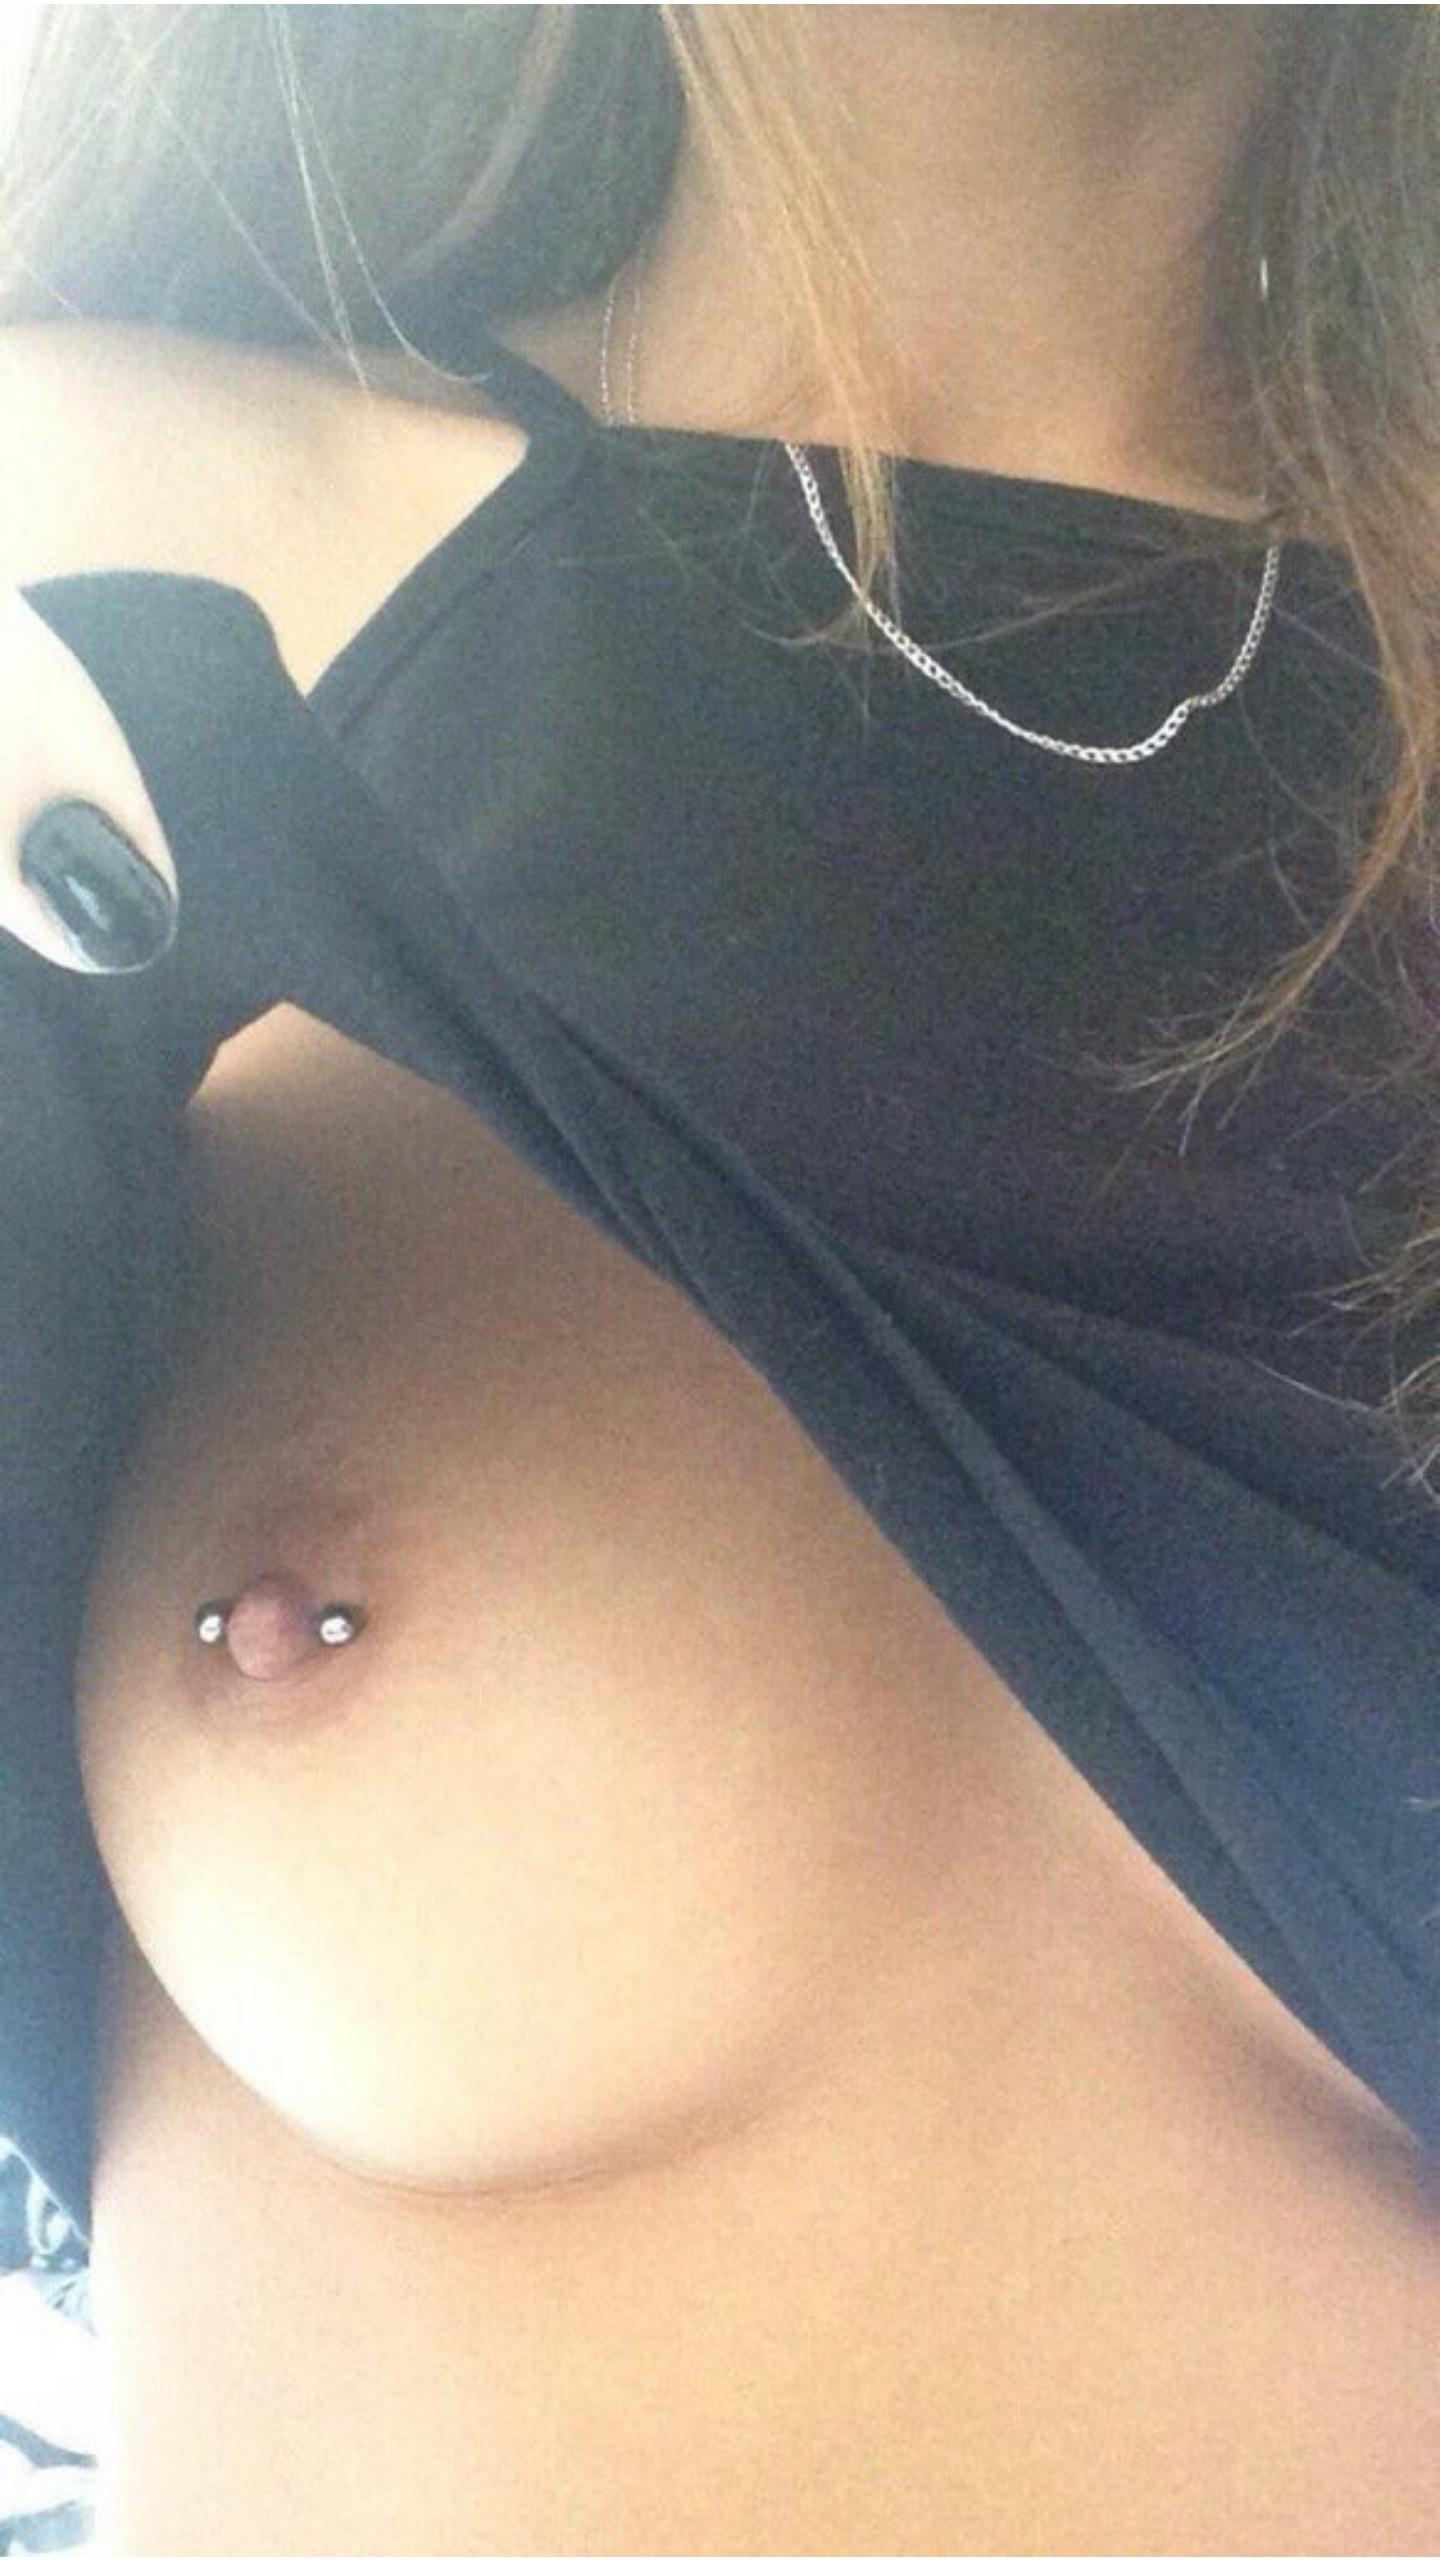 All About Those Nipples: A Gallery of Sensual Piercing GIFs